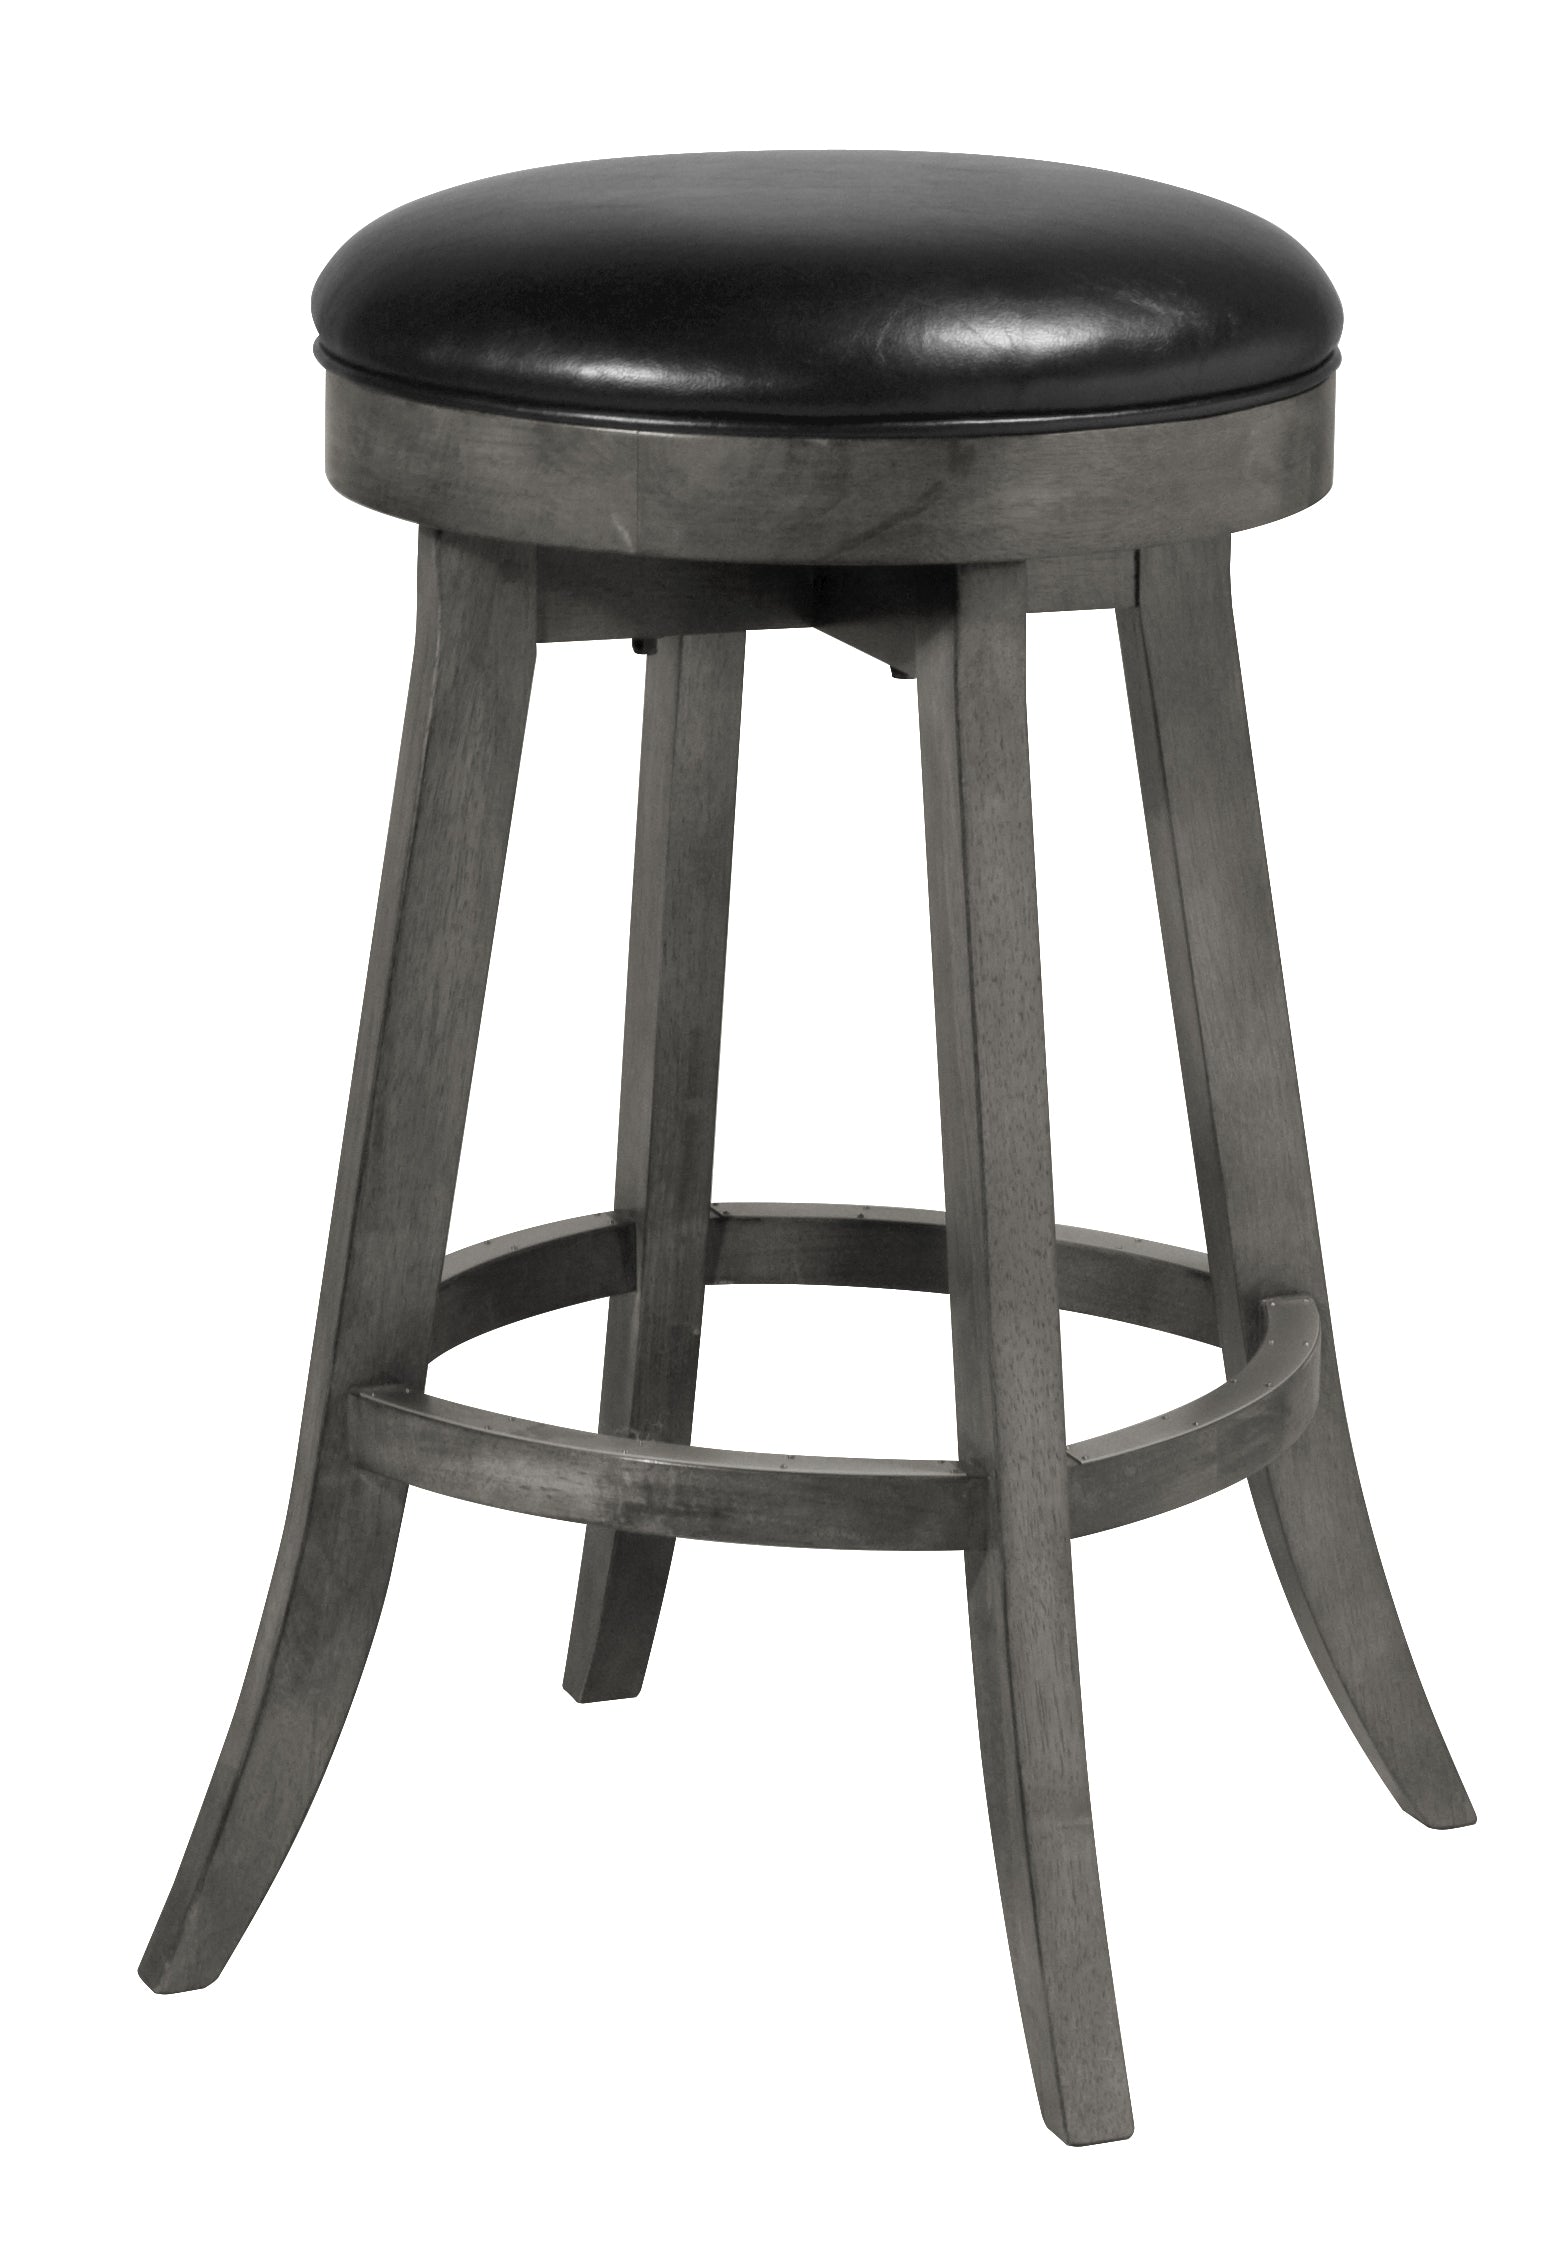 Legacy Billiards Sterling Backless Barstool in Shade Finish